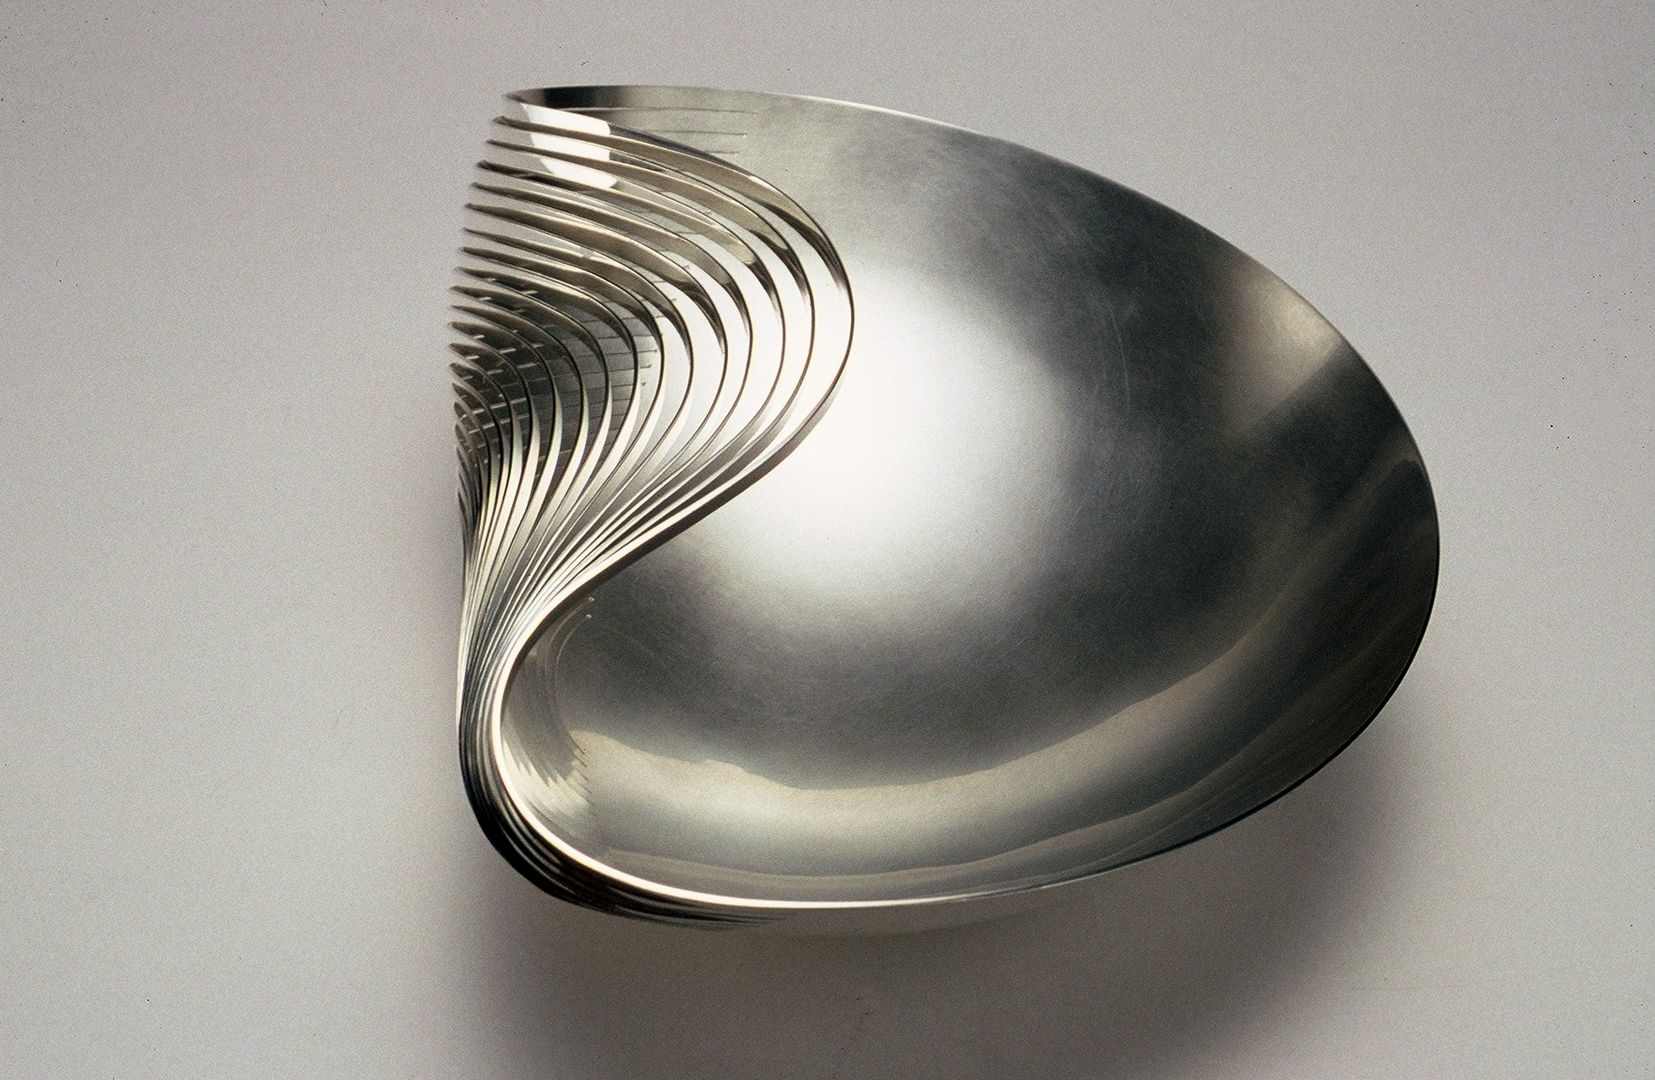 Dented Bowl Ane Christensen Other spaces Sculptures